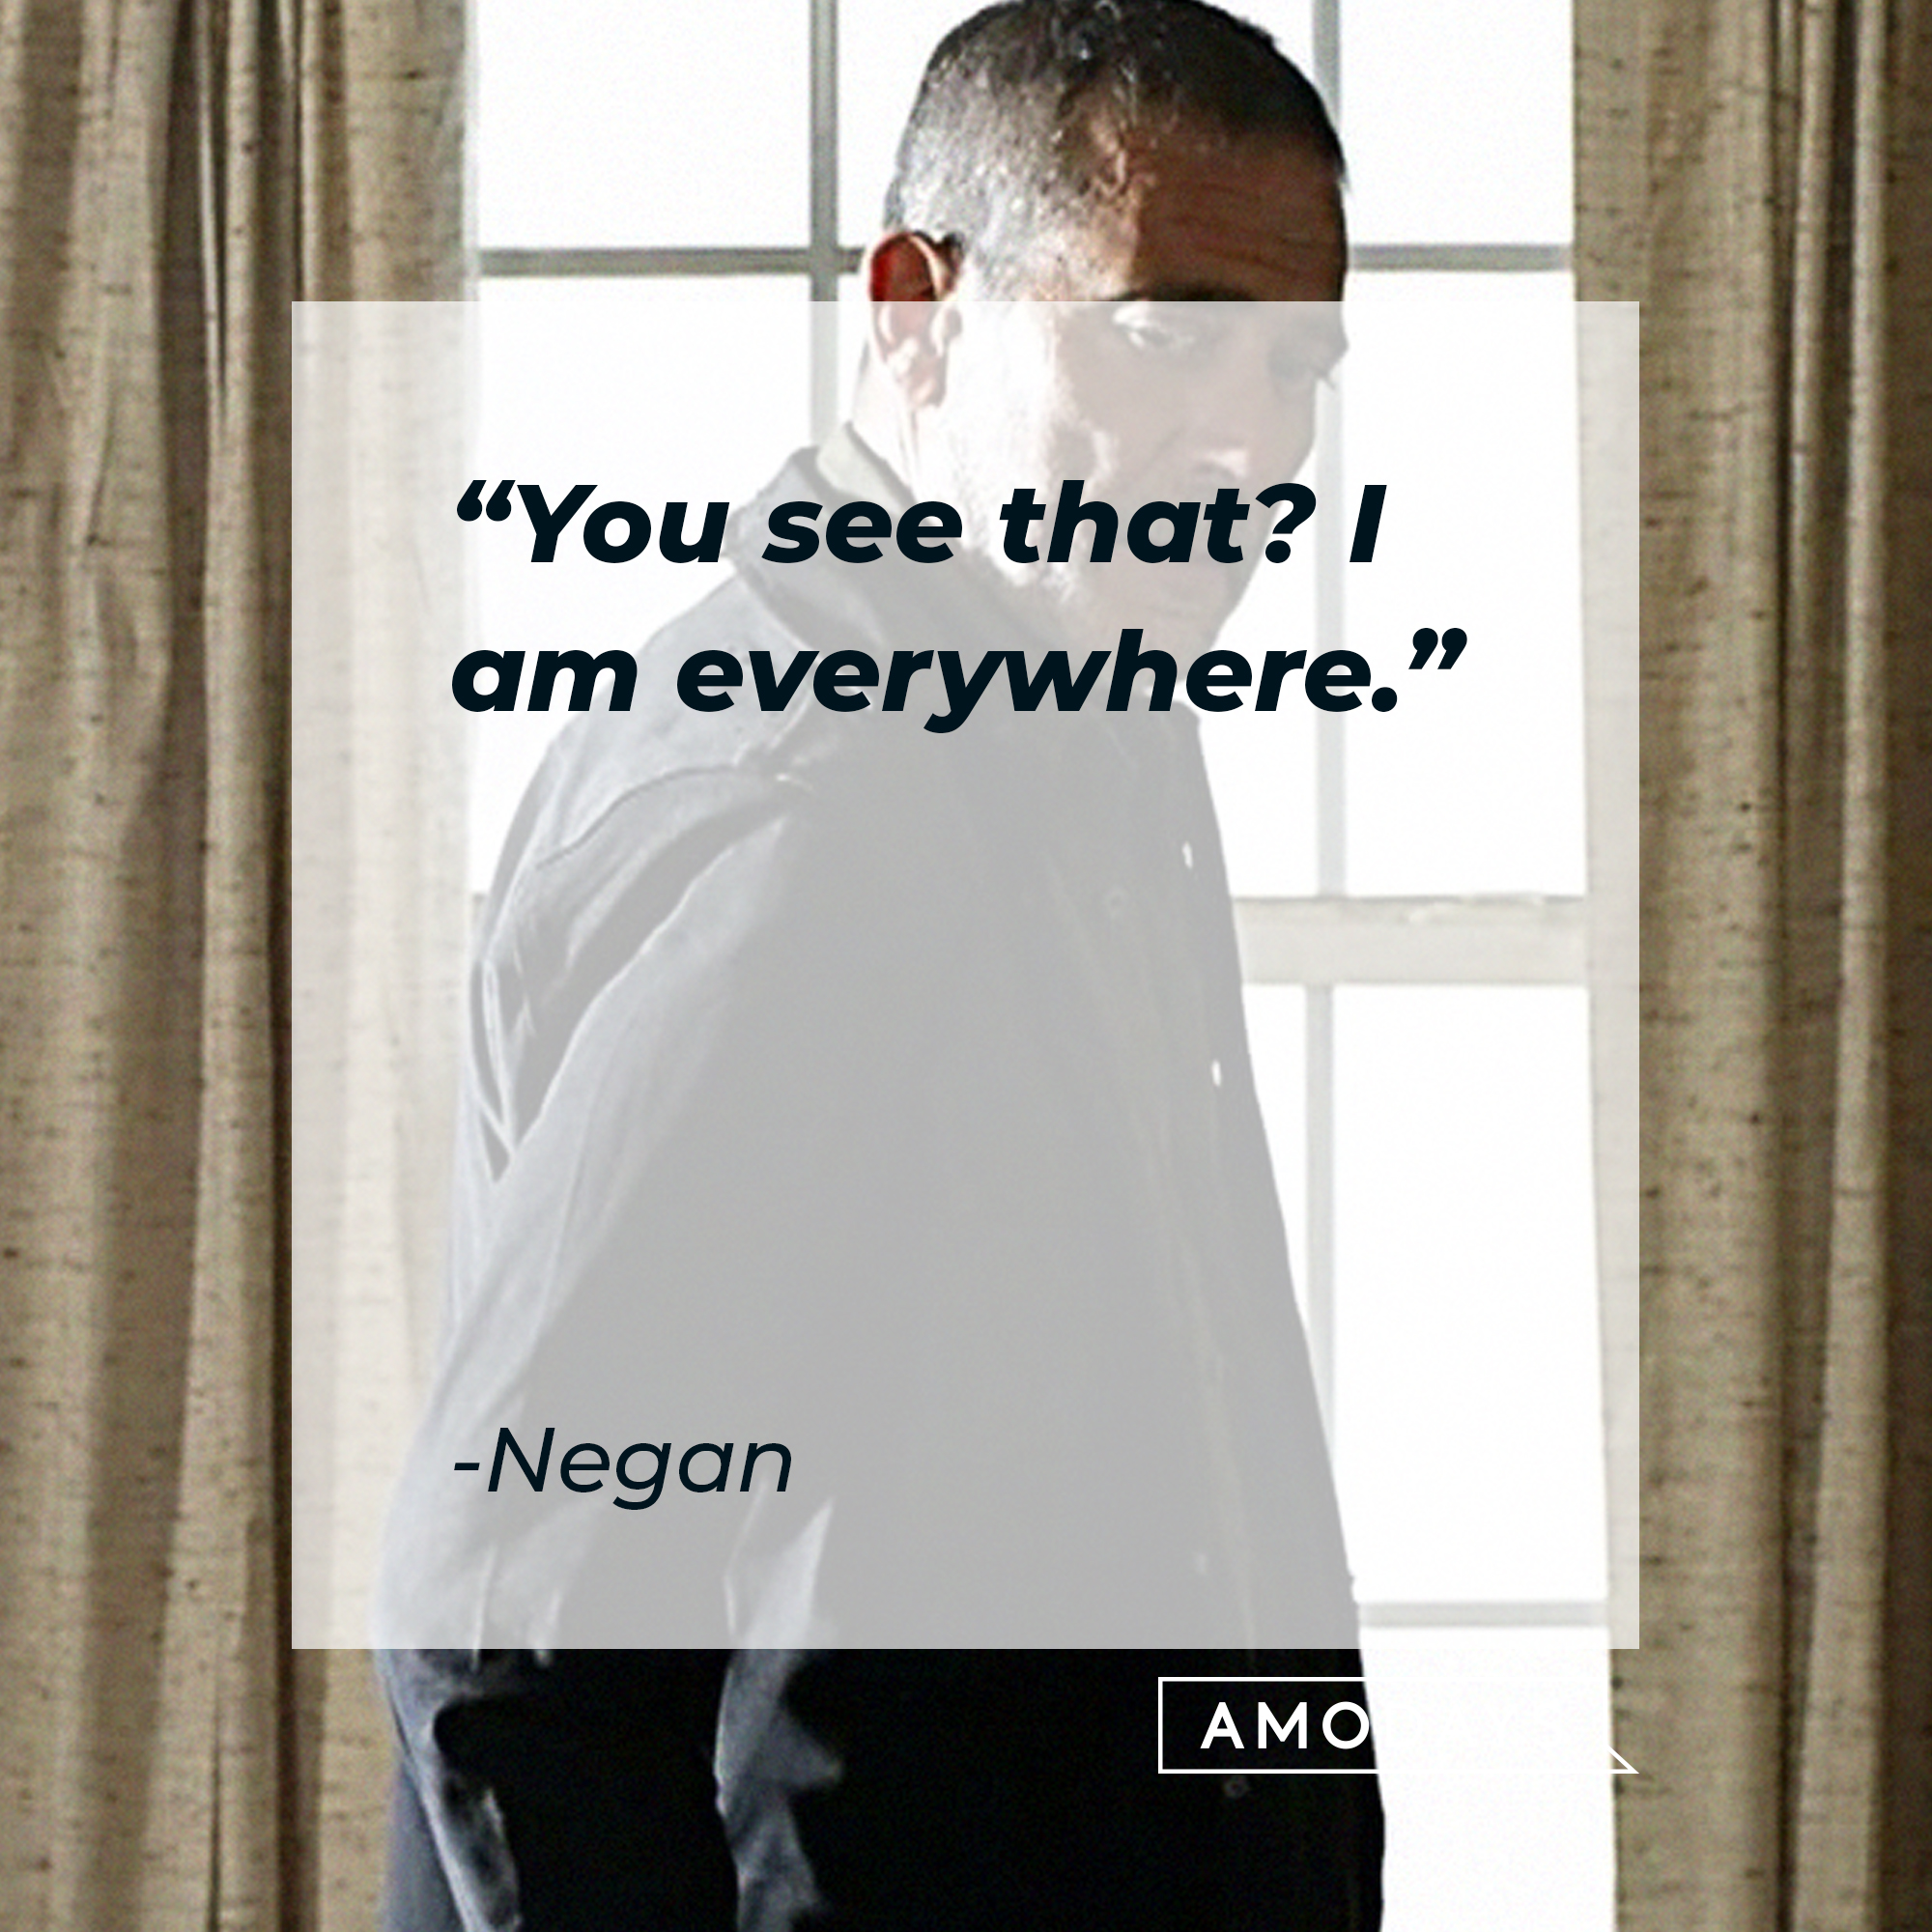 Negan's quote: "You see that? I am everywhere." | Source: Facebook/TheWalkingDeadAMC